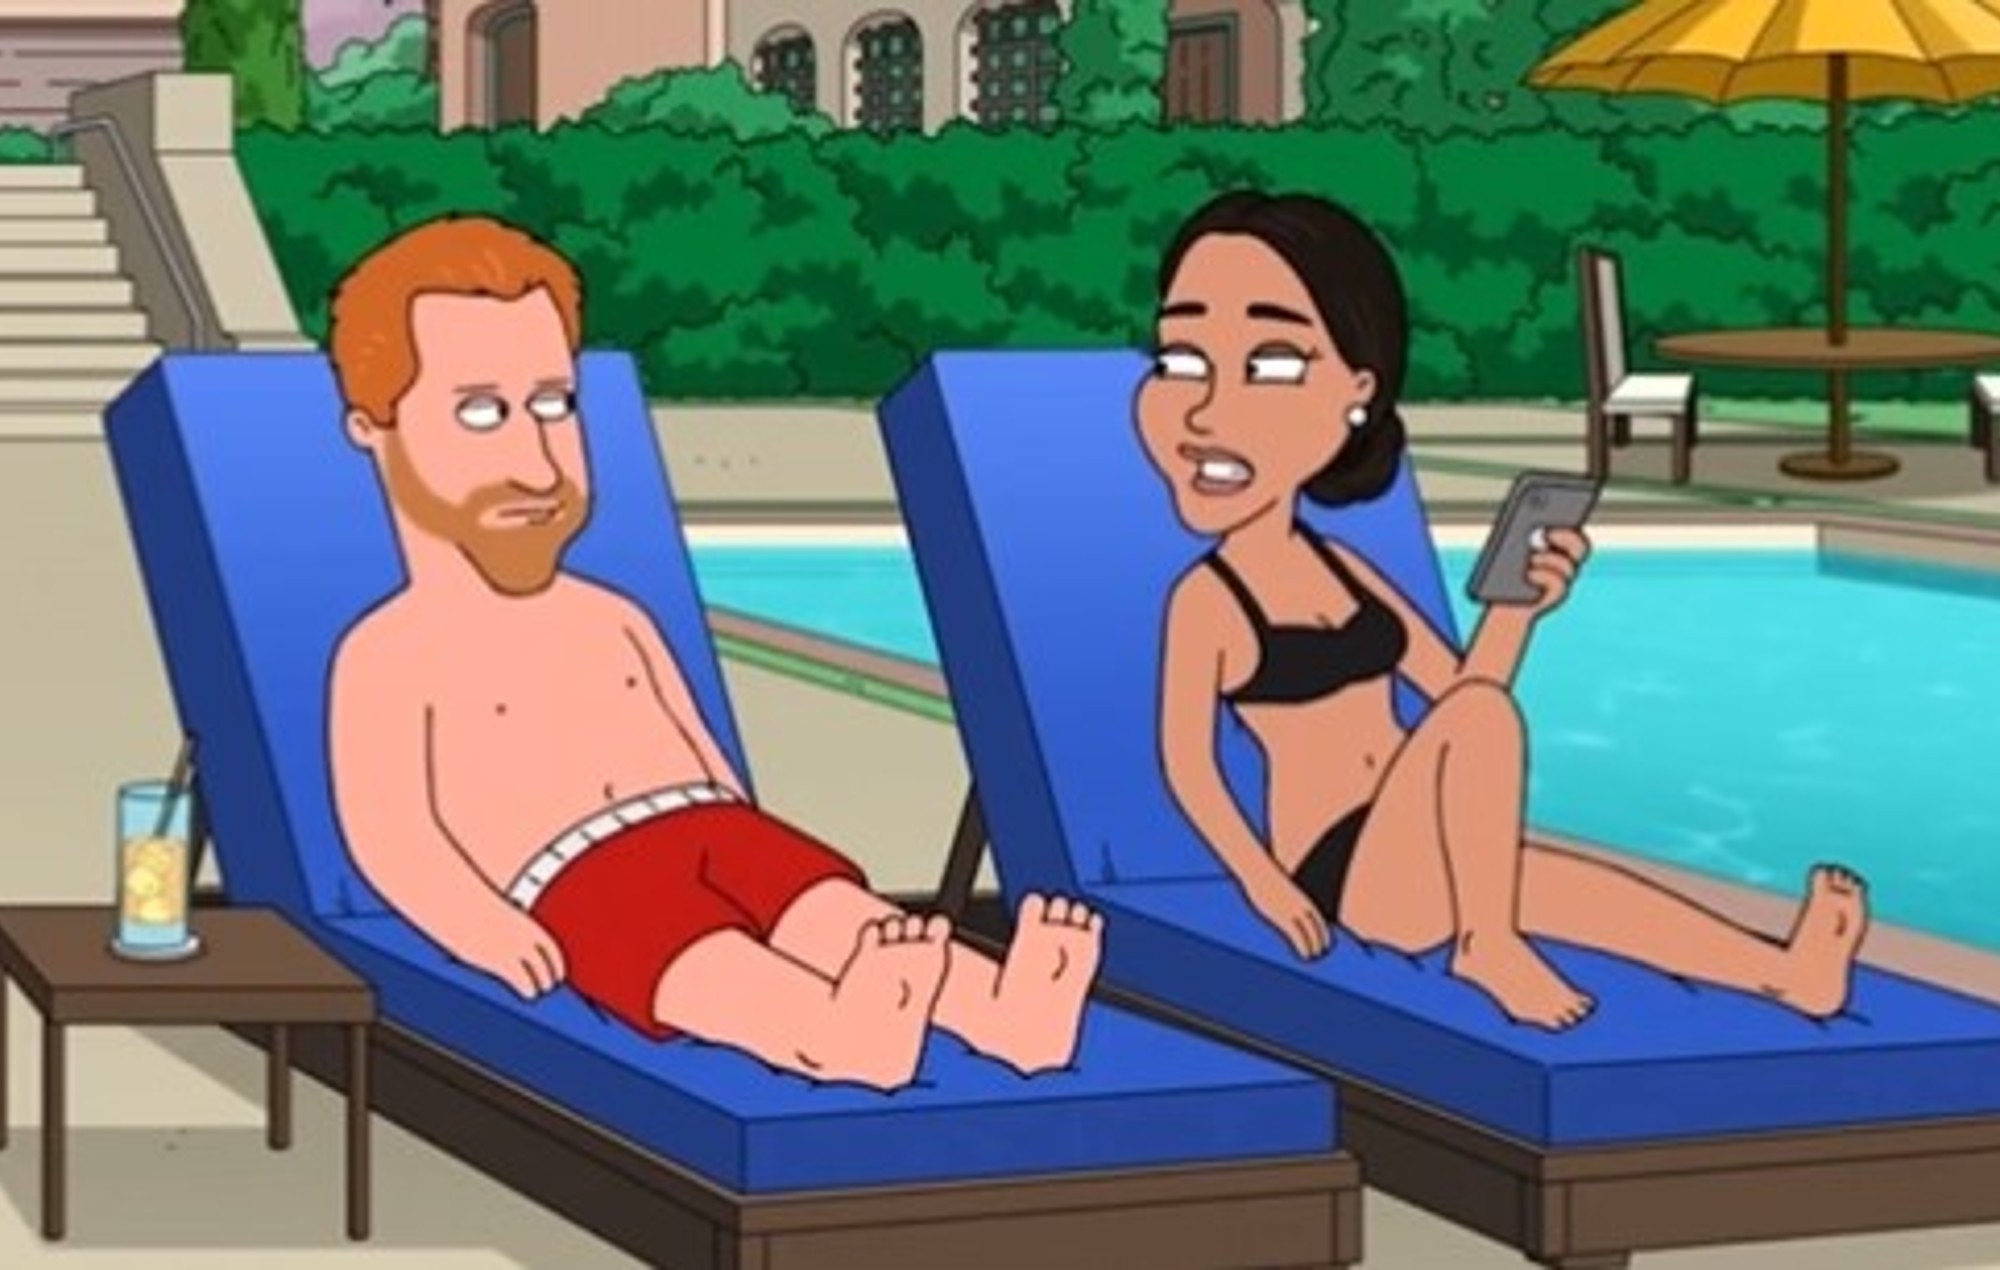 ‘Family Guy’ roasts Prince Harry and Meghan Markle in new parody